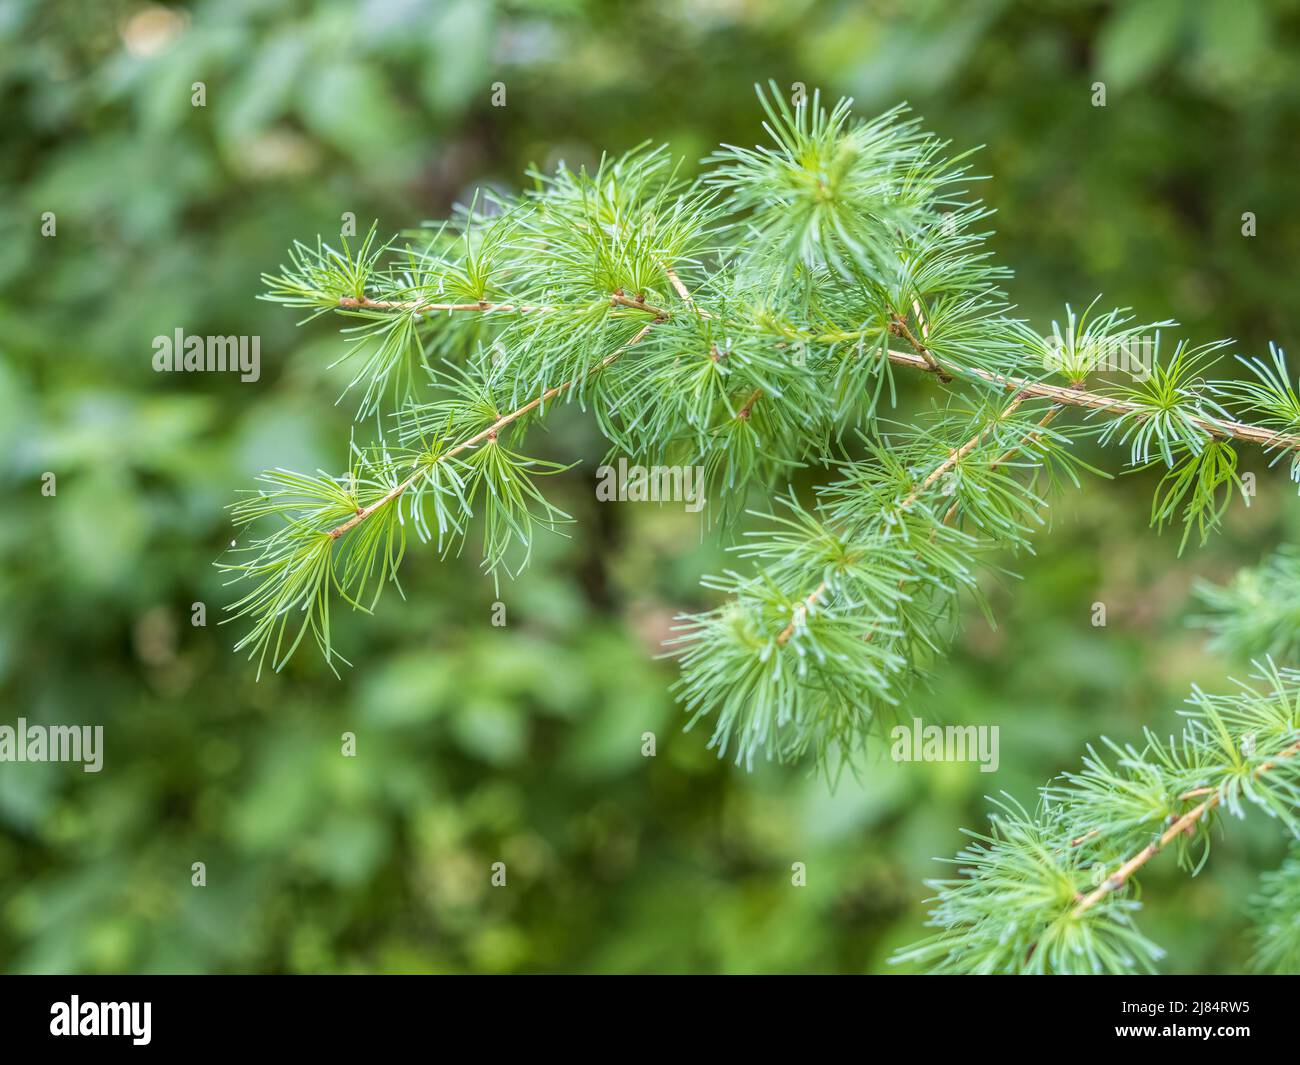 Young branches of larch. Closeup of green larch young needles. Larix sibirica, the Siberian larch or Russian larch. Stock Photo